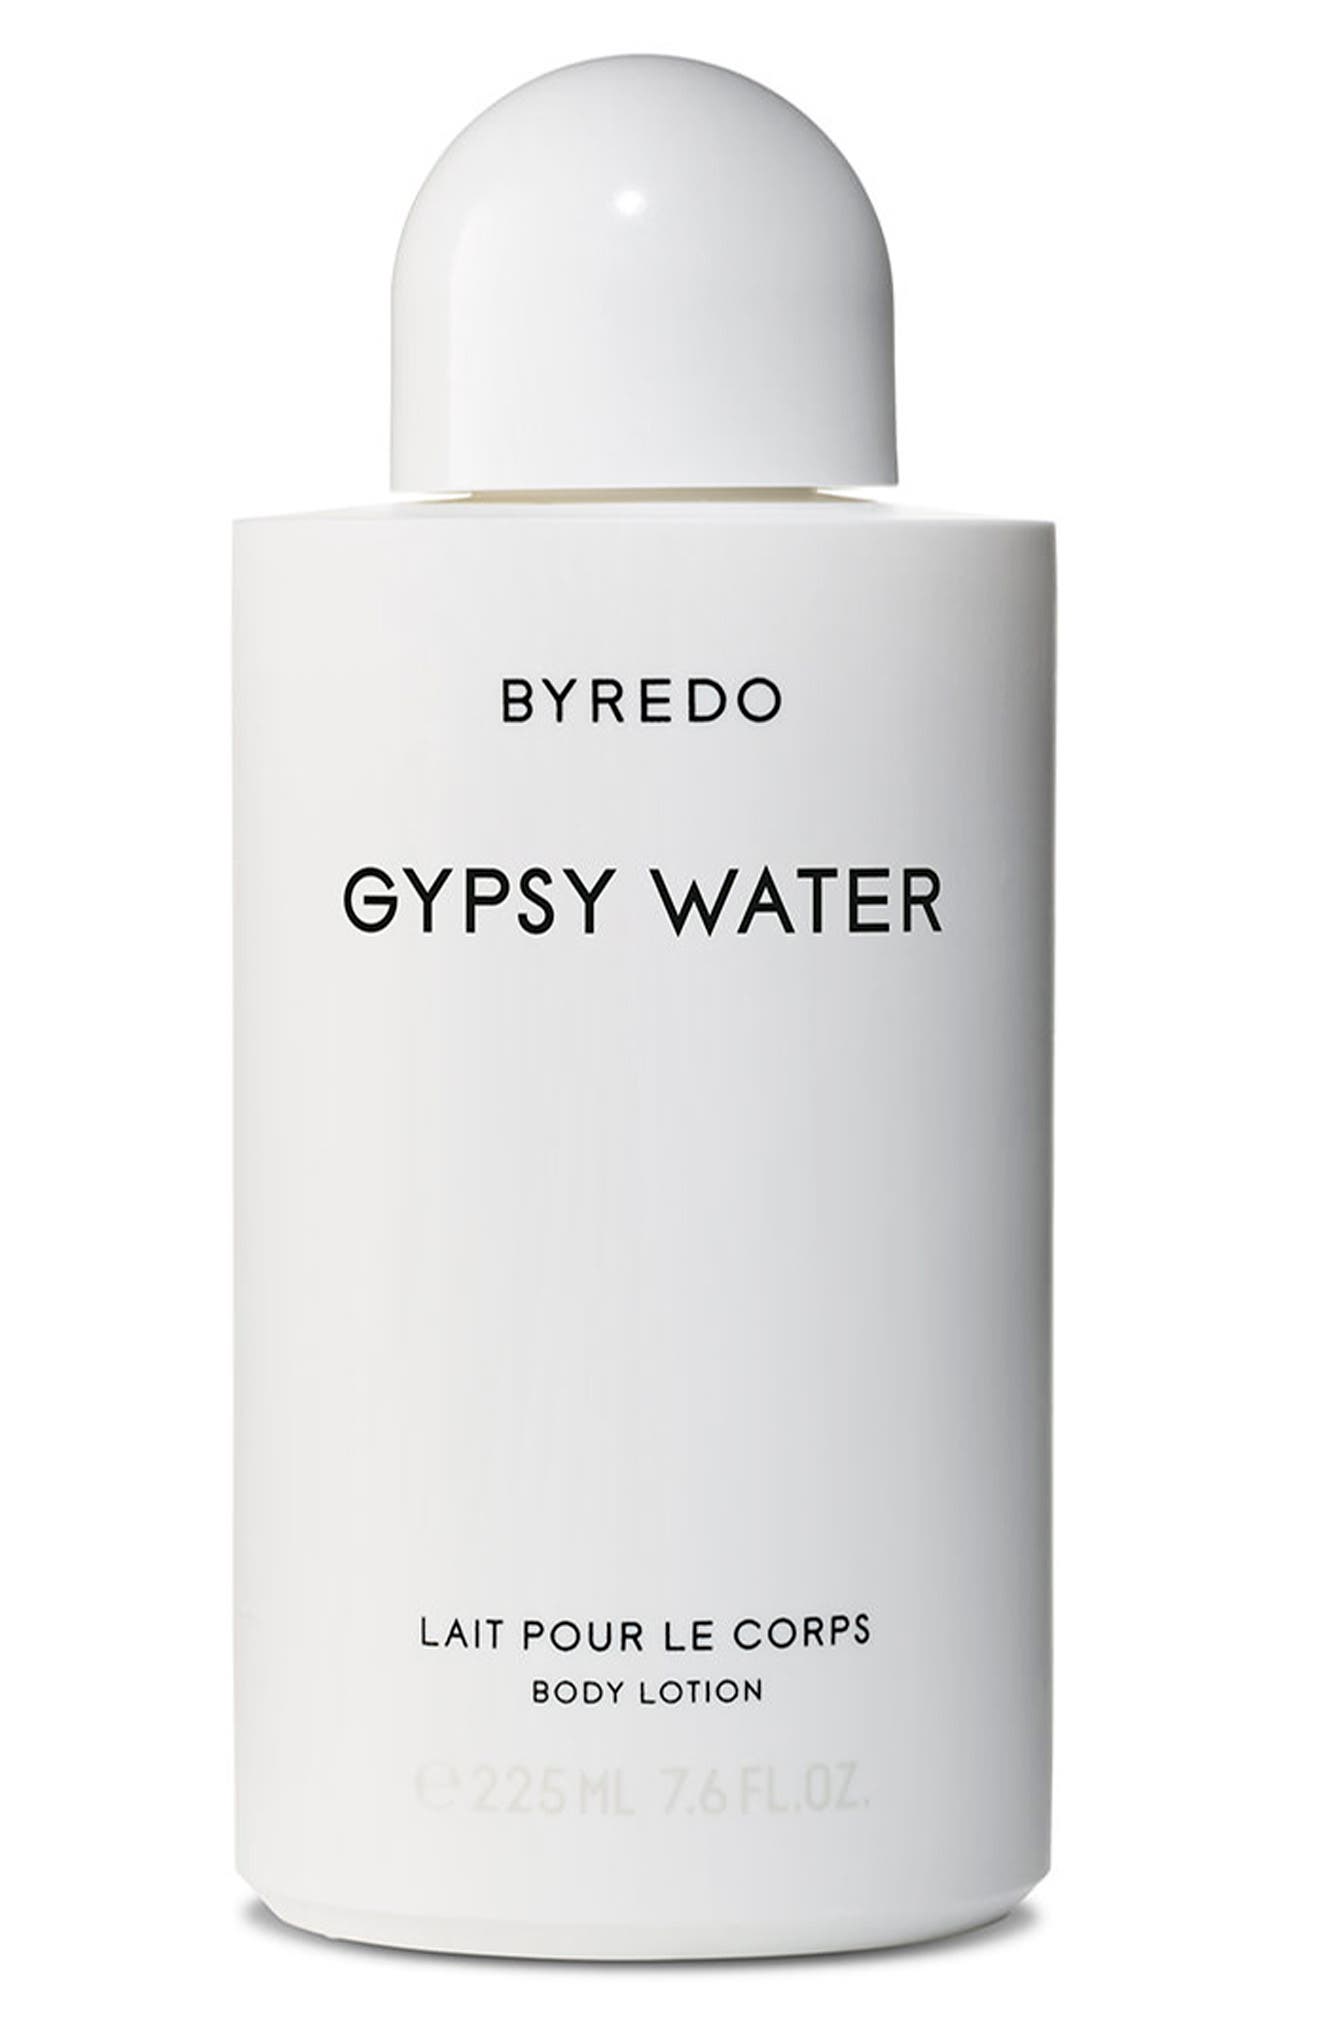 UPC 020000000091 product image for BYREDO Gypsy Water Body Lotion at Nordstrom | upcitemdb.com